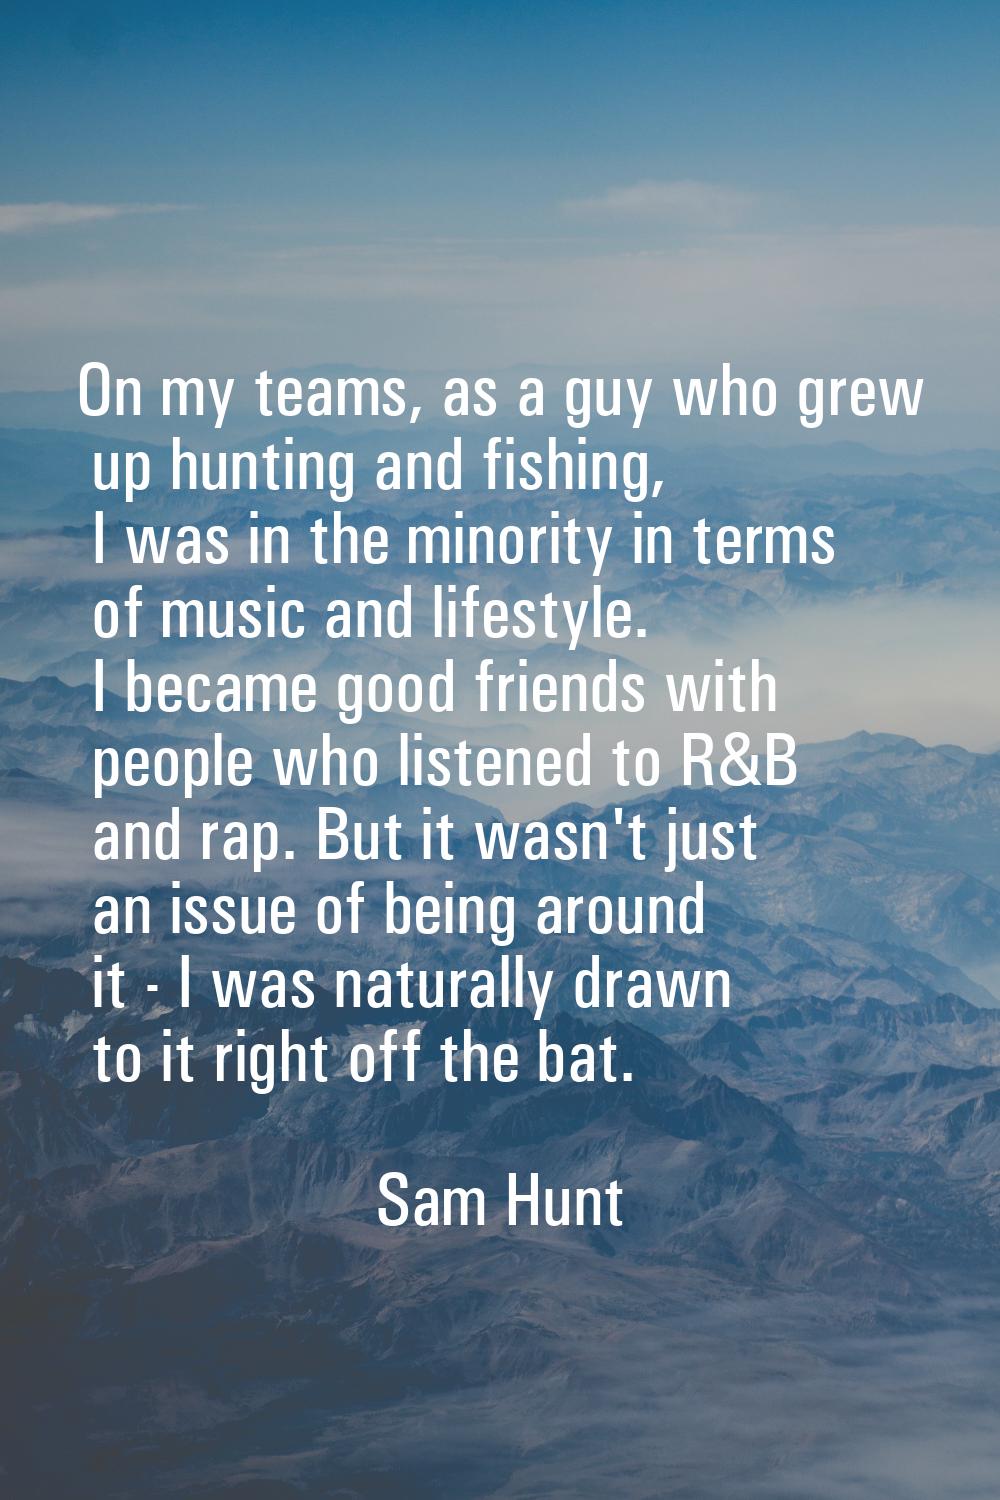 On my teams, as a guy who grew up hunting and fishing, I was in the minority in terms of music and 